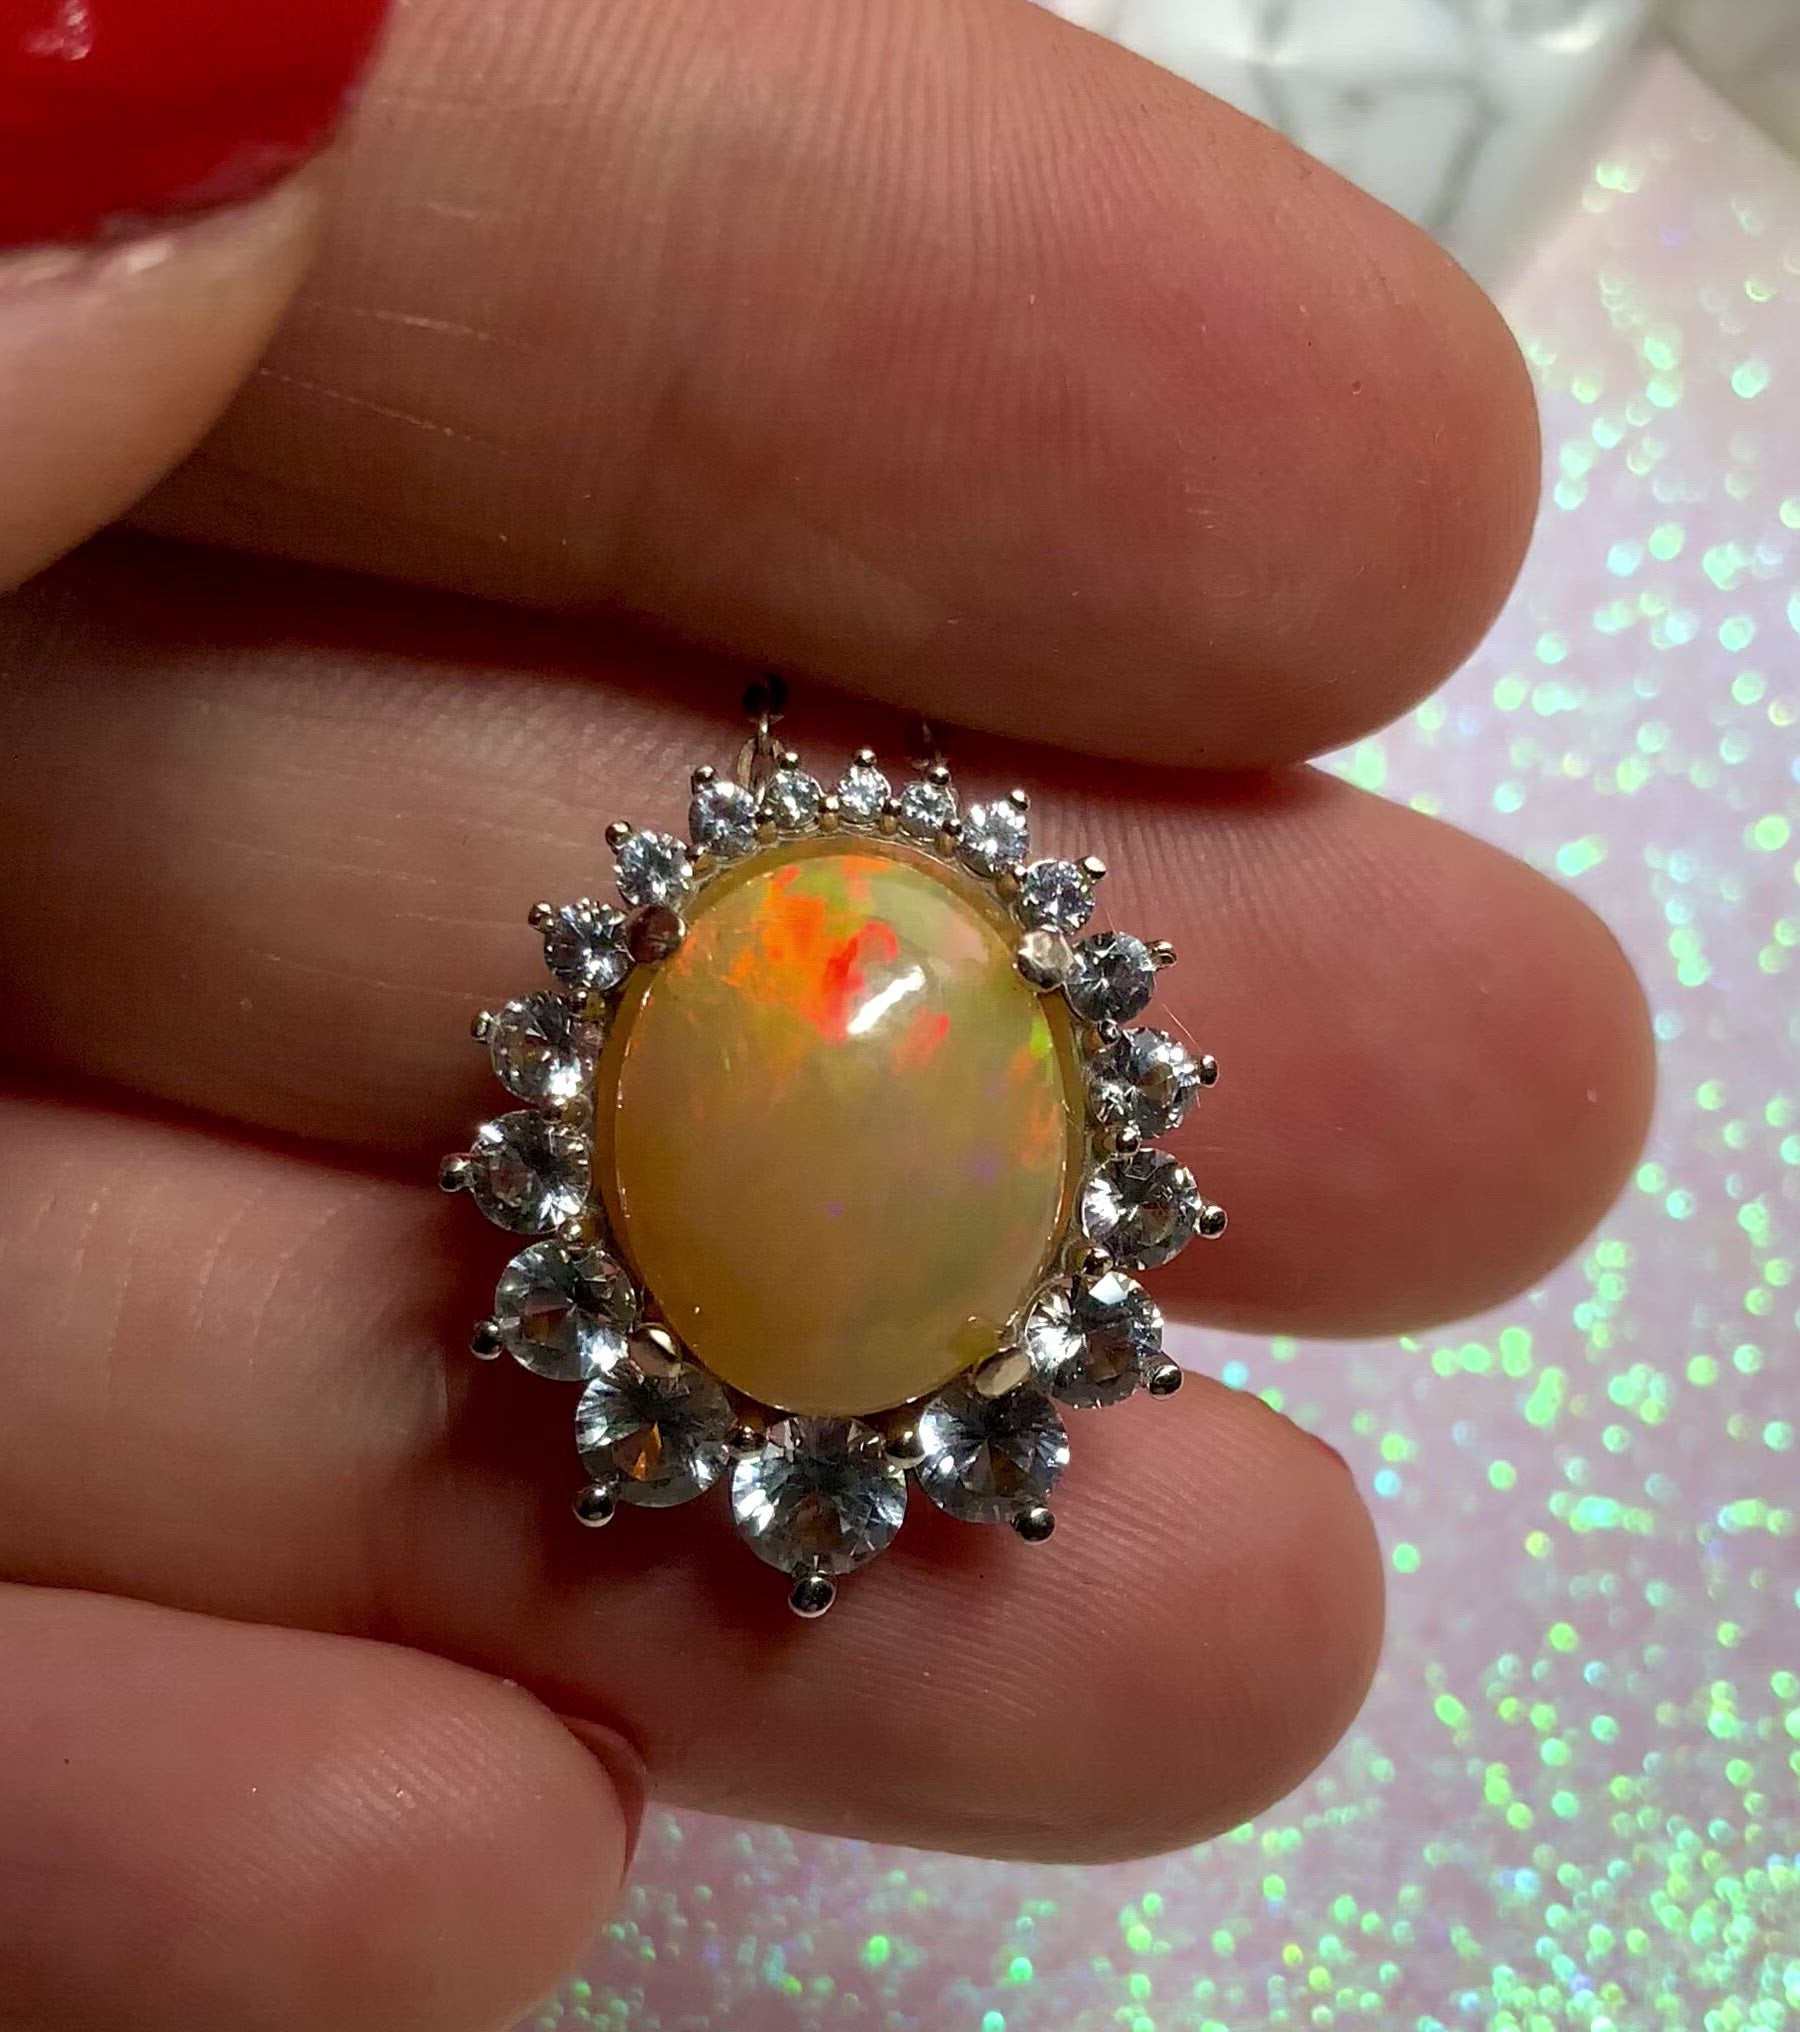 Aphrodite’s Dream. AAA+ Genuine Opal and AA+ Genuine White Sapphire Sunburst Opal Necklace in 14K Solid White Gold. Genuine Opal Jewelry. Genuine Sapphire Jewelry. Sunburst Pendant. White Gold.